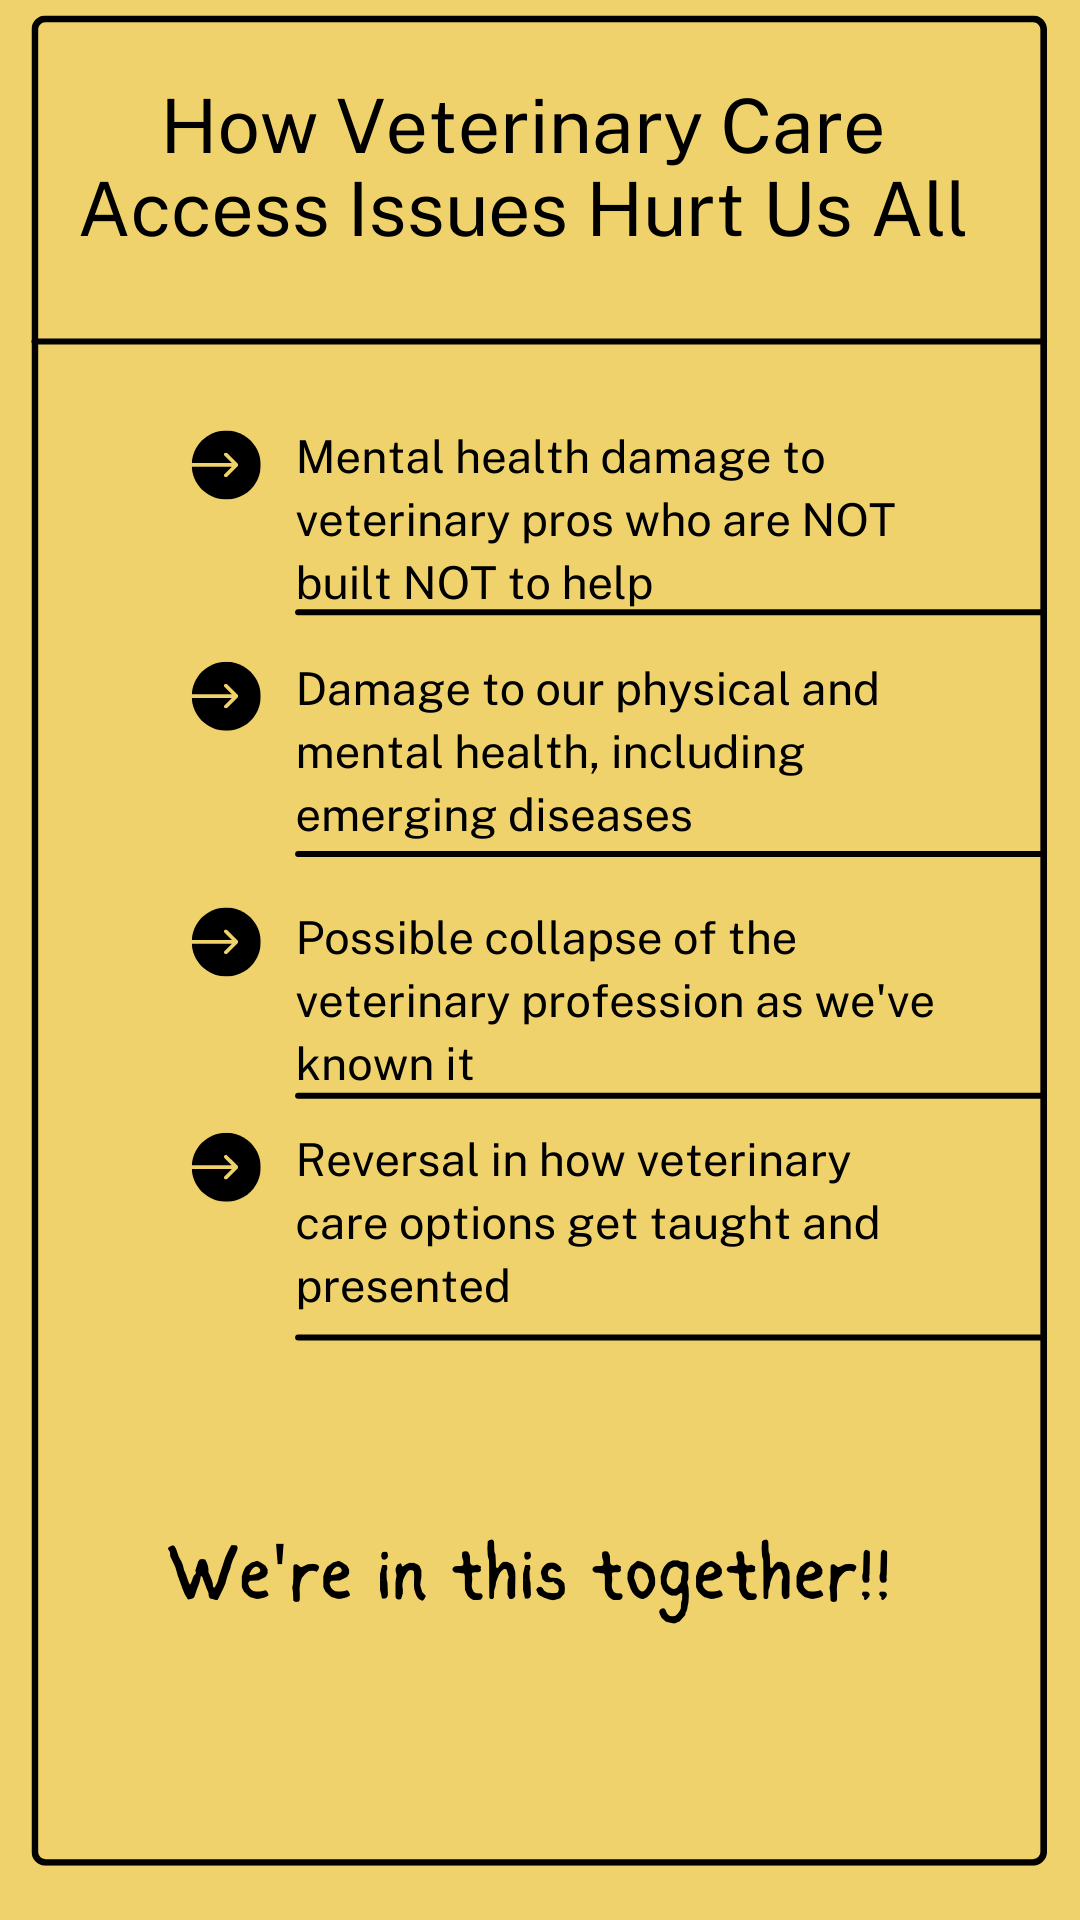 veterinary care access issues graphic - list of looming outcomes, same as the subheads on the post itself